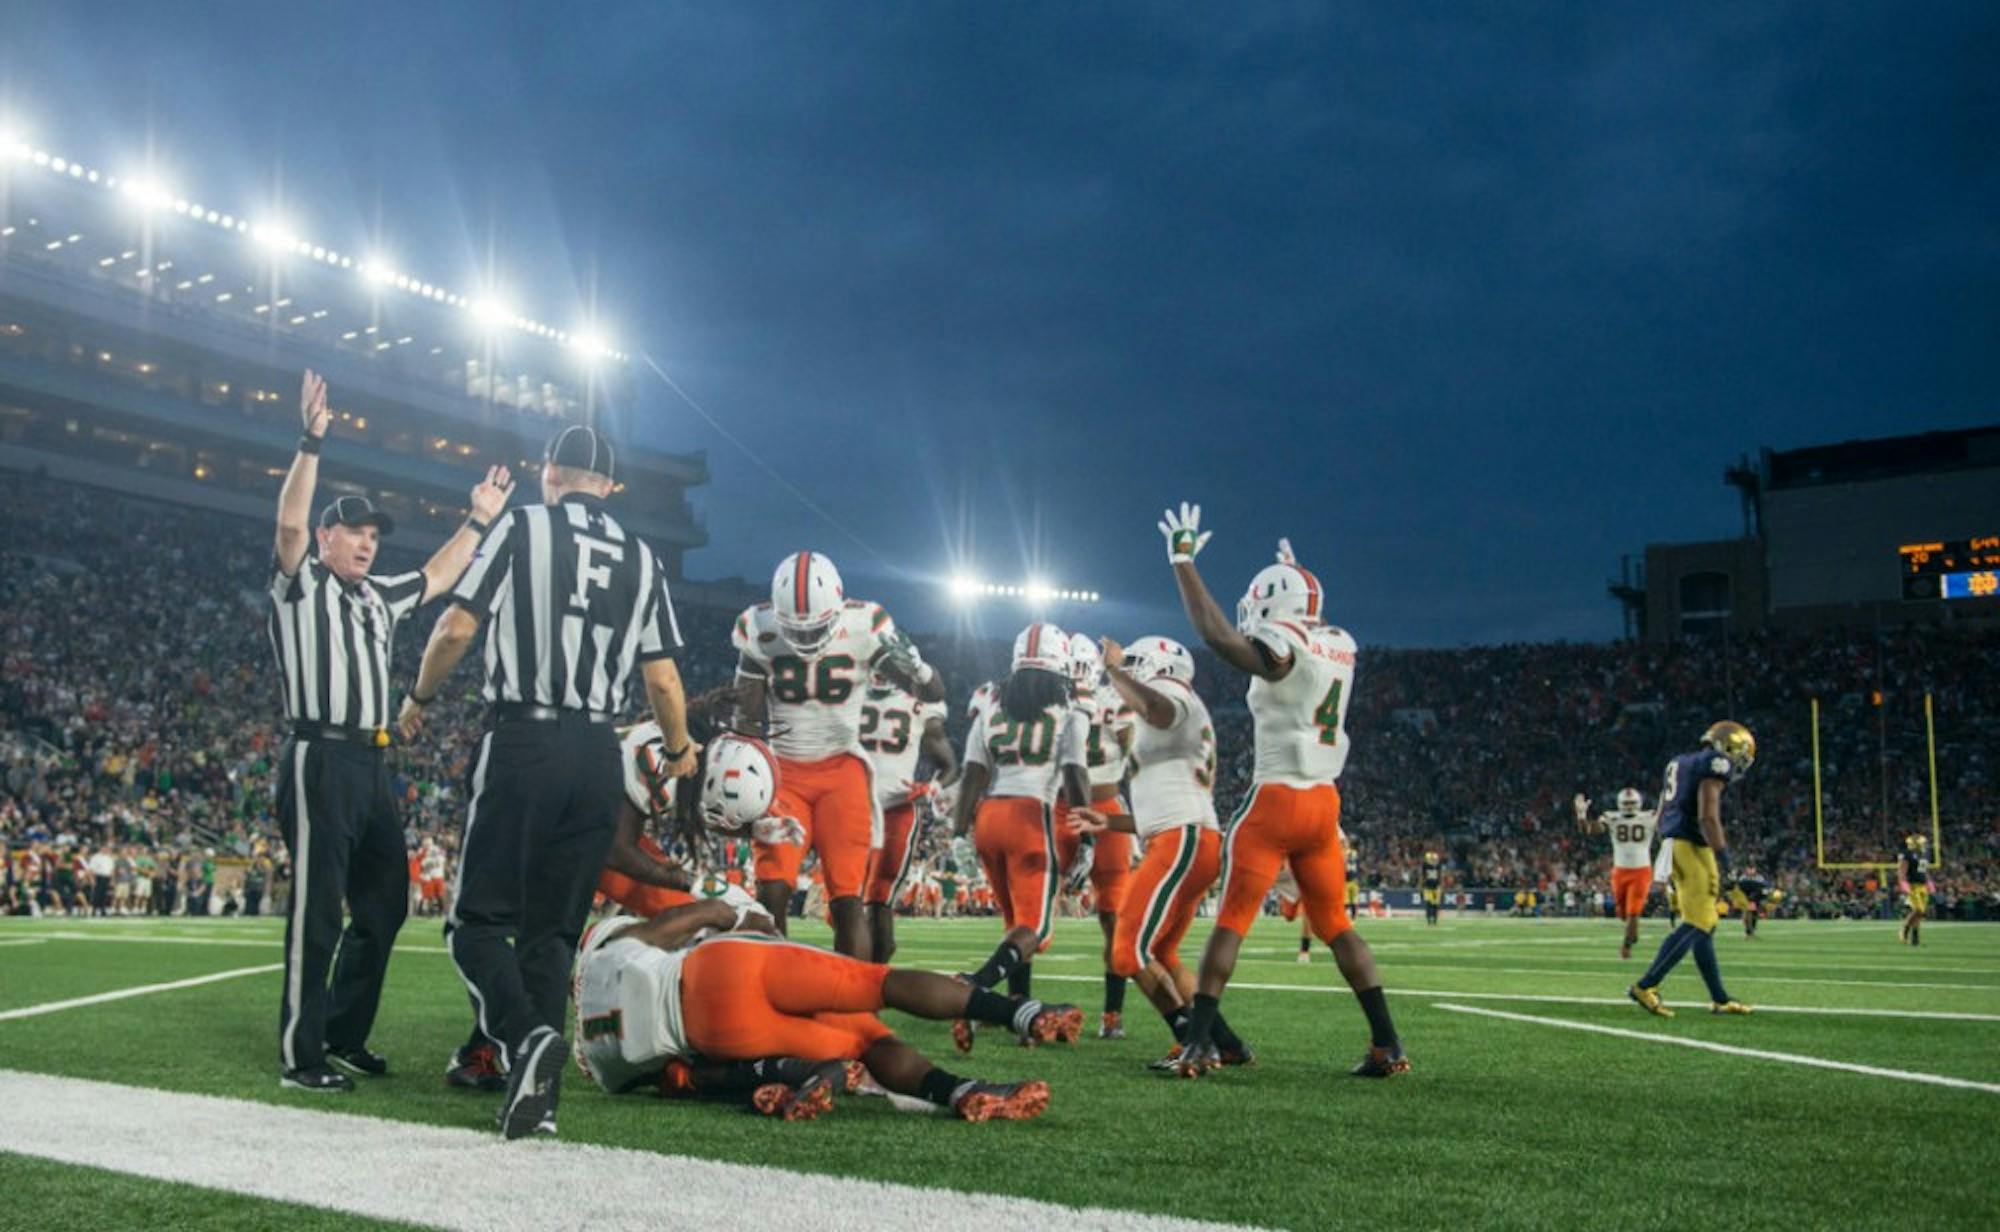 The Miami punt coverage unit celebrates scoring a go-ahead touchdown after Irish sophomore receiver C.J. Sanders, right, muffed a punt that rolled into the end zone. The recovery put the Hurricanes up 27-20.